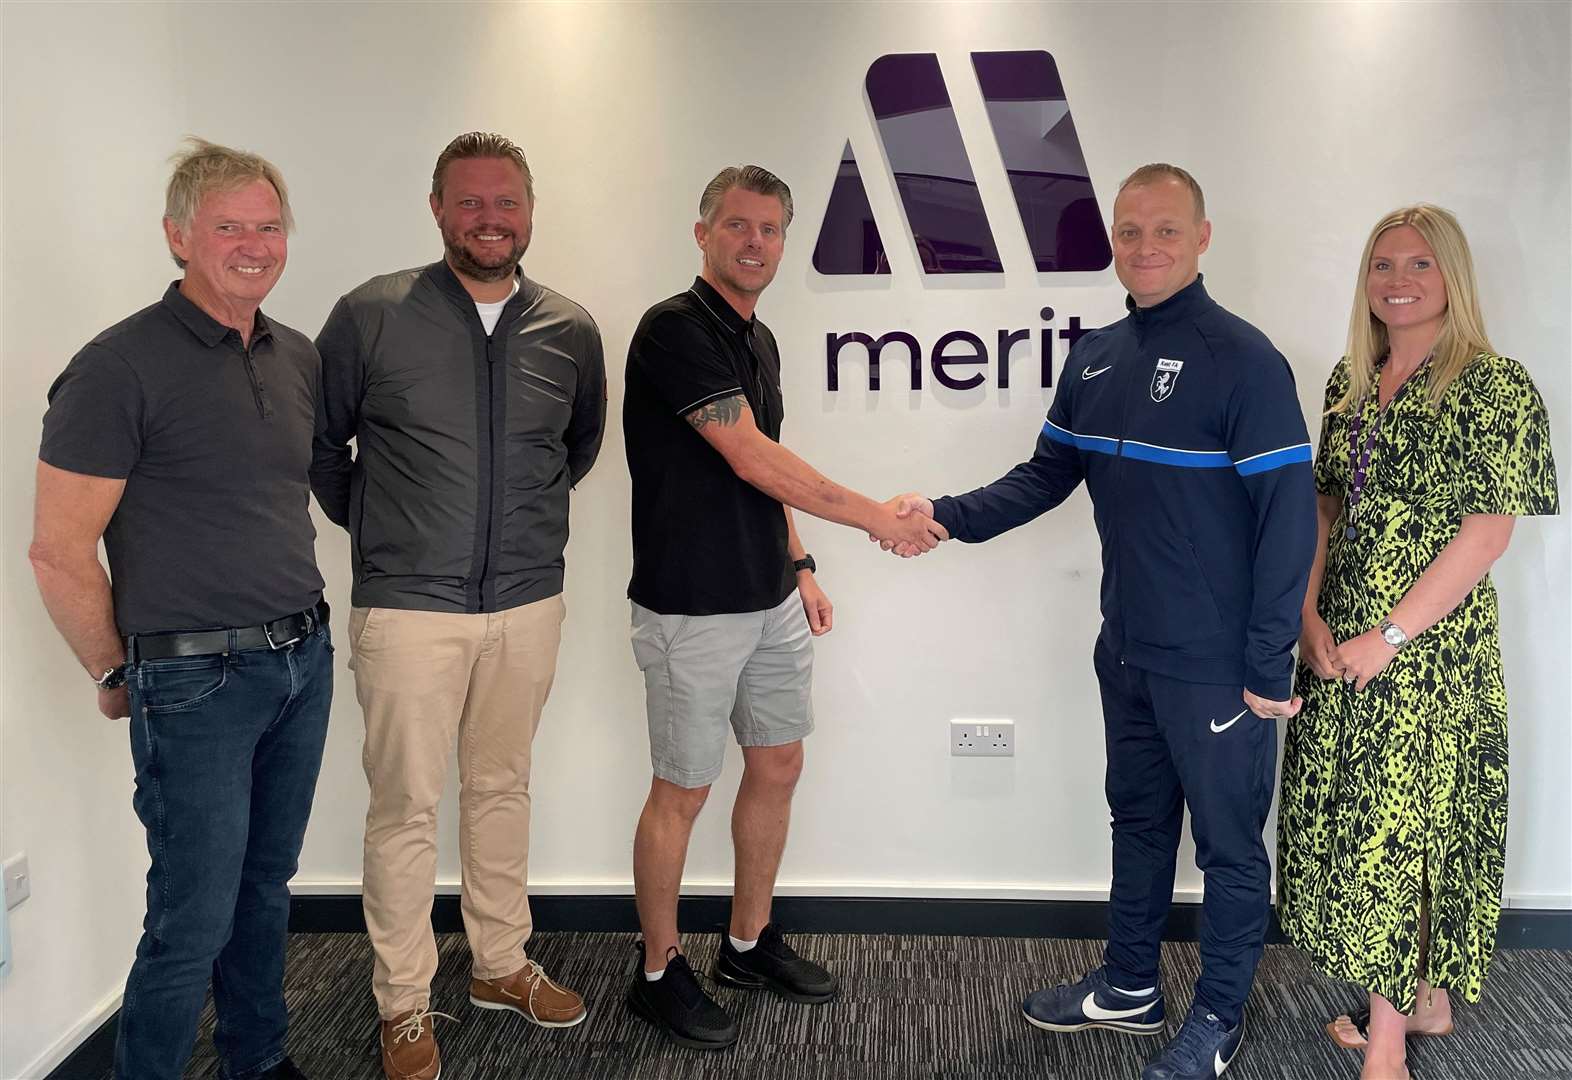 The Merit Group has renewed their partnership as Official County Cup Partner (Youth) for the 2022/23 season